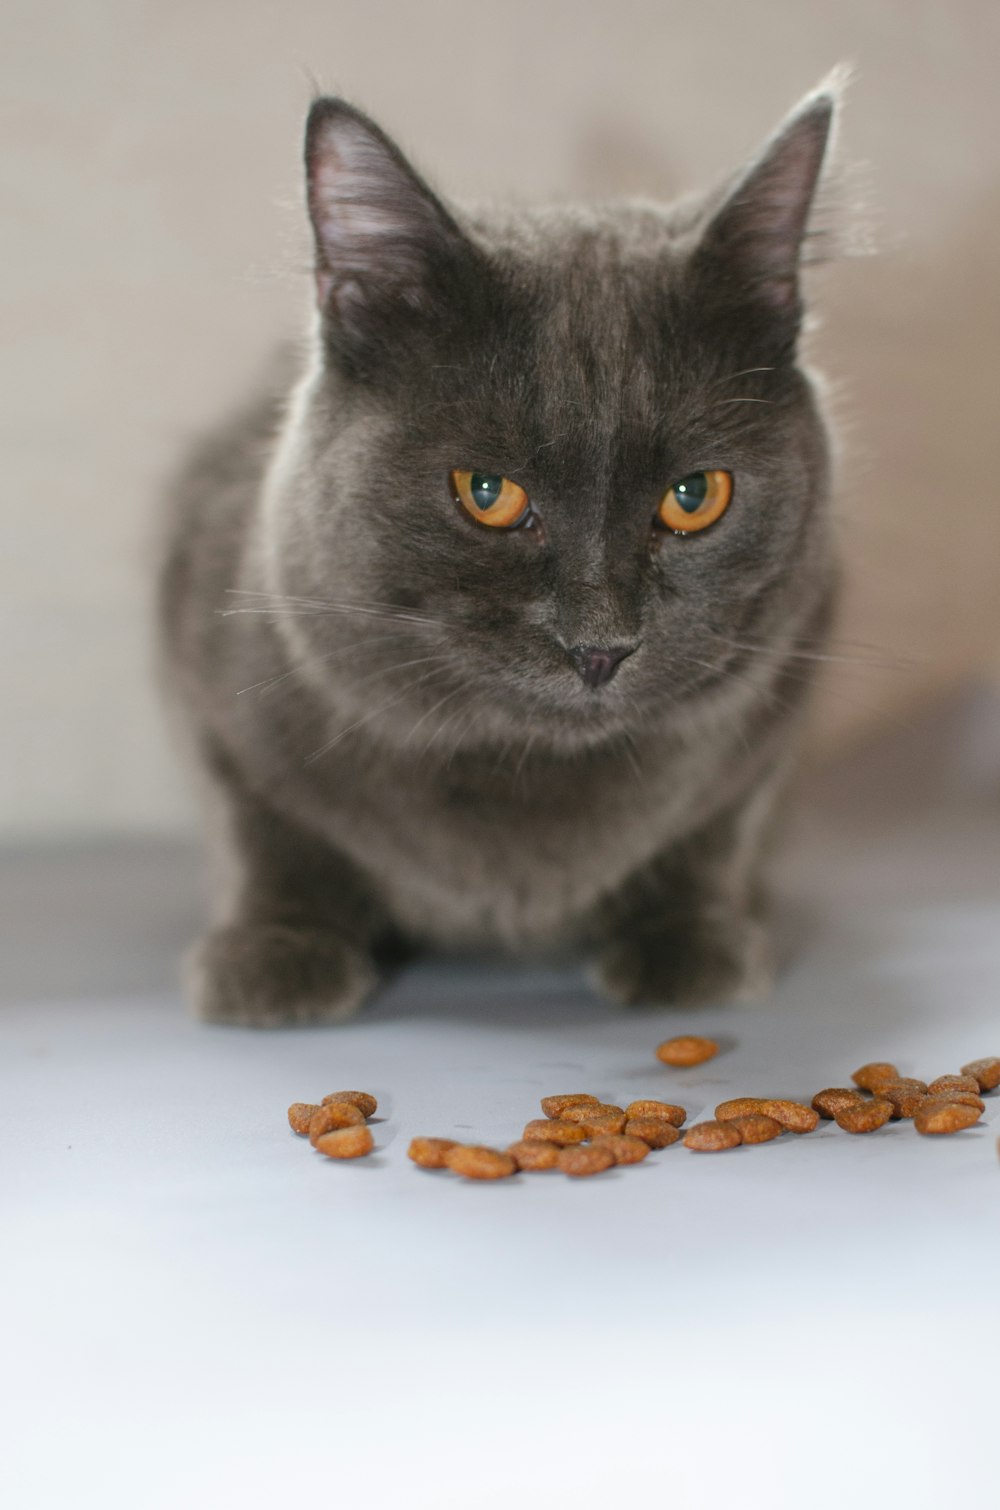 a cat looking at a pile of small orange objects